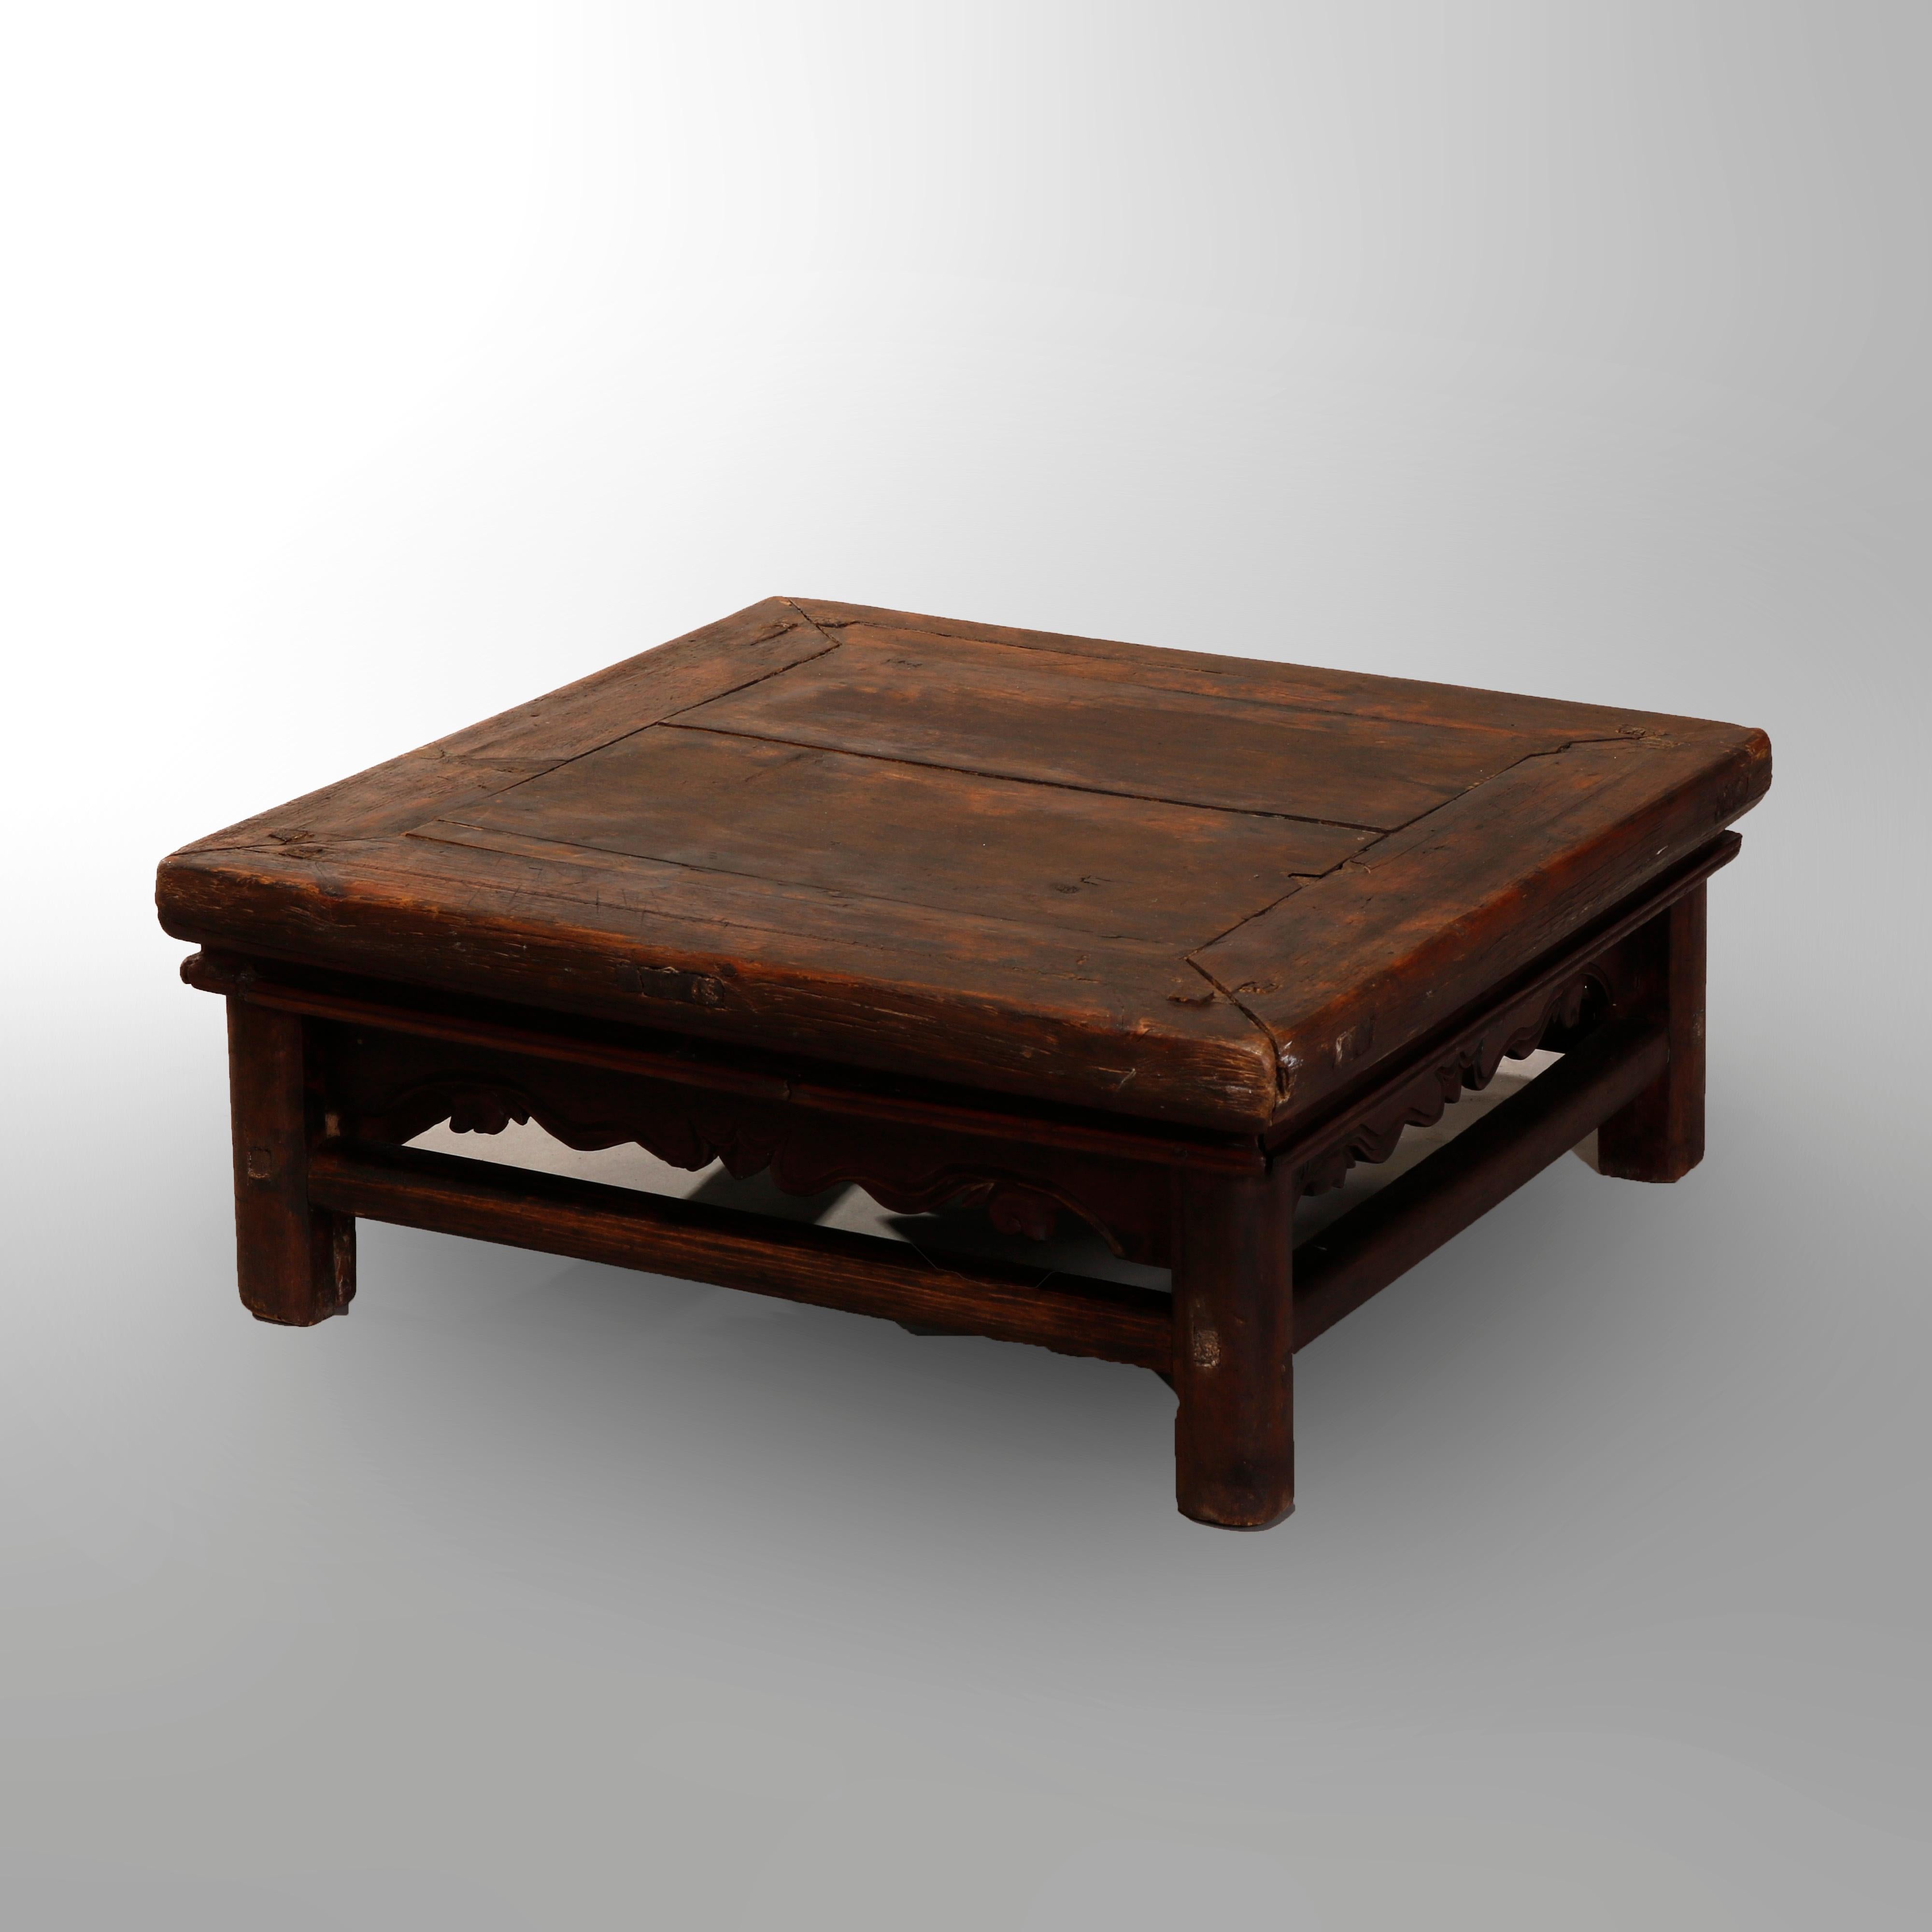 Primitive Antique Chinese Carved Hardwood Low Table, 19th Century